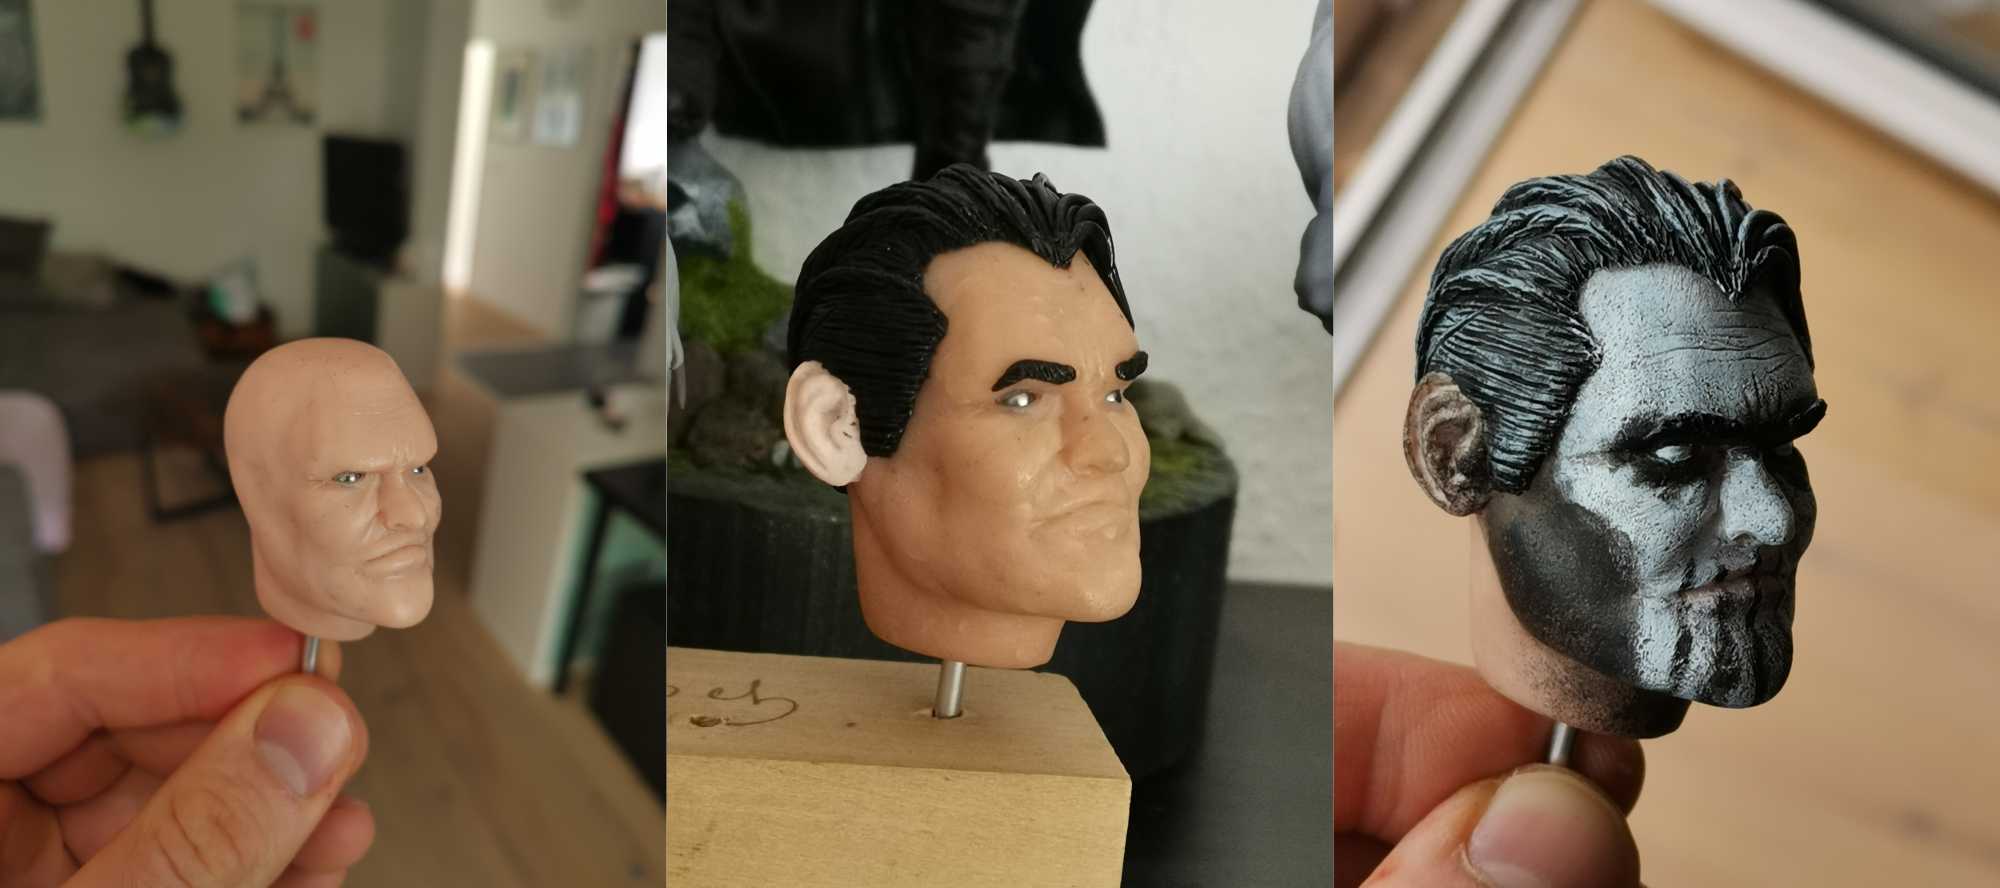 The Punisher - Sculpting Head